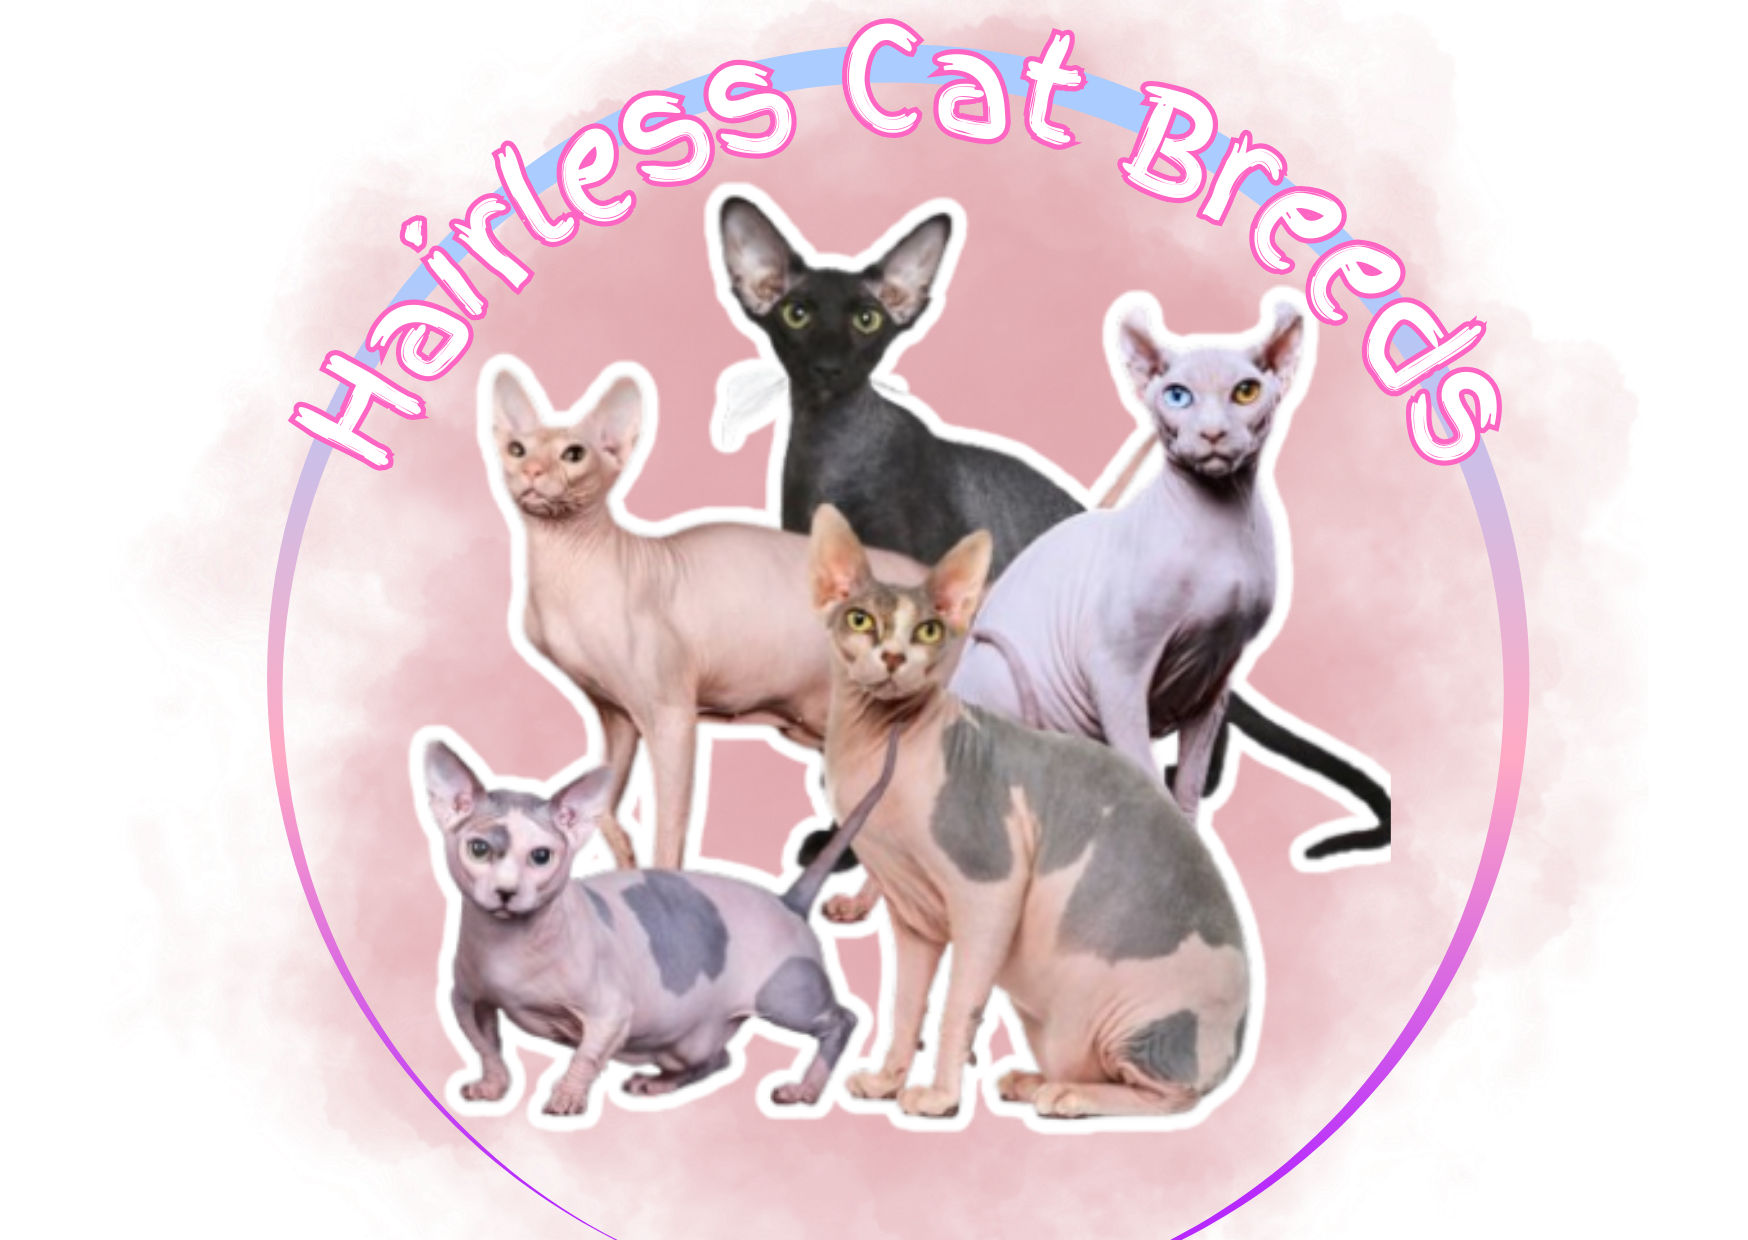 Meet the Hairless Cat Breeds Perfect for Your Next Beautiful Friend